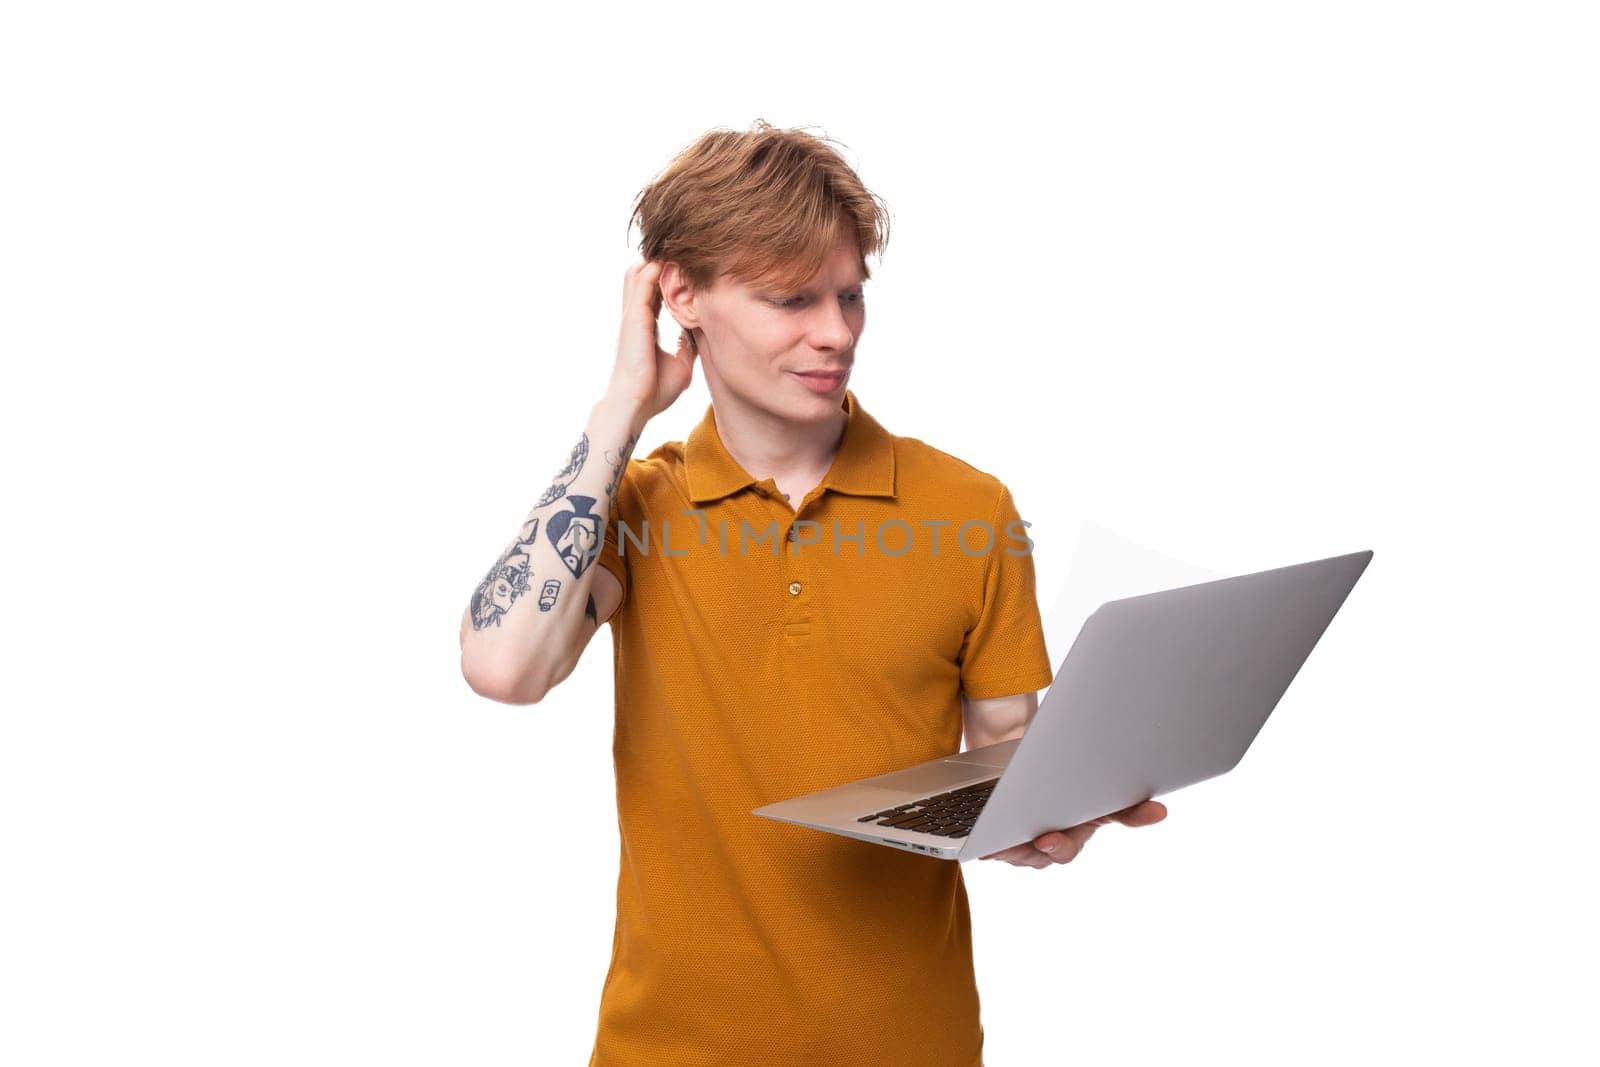 young red-haired guy in an orange t-shirt is studying using a laptop on a white background with copy space.